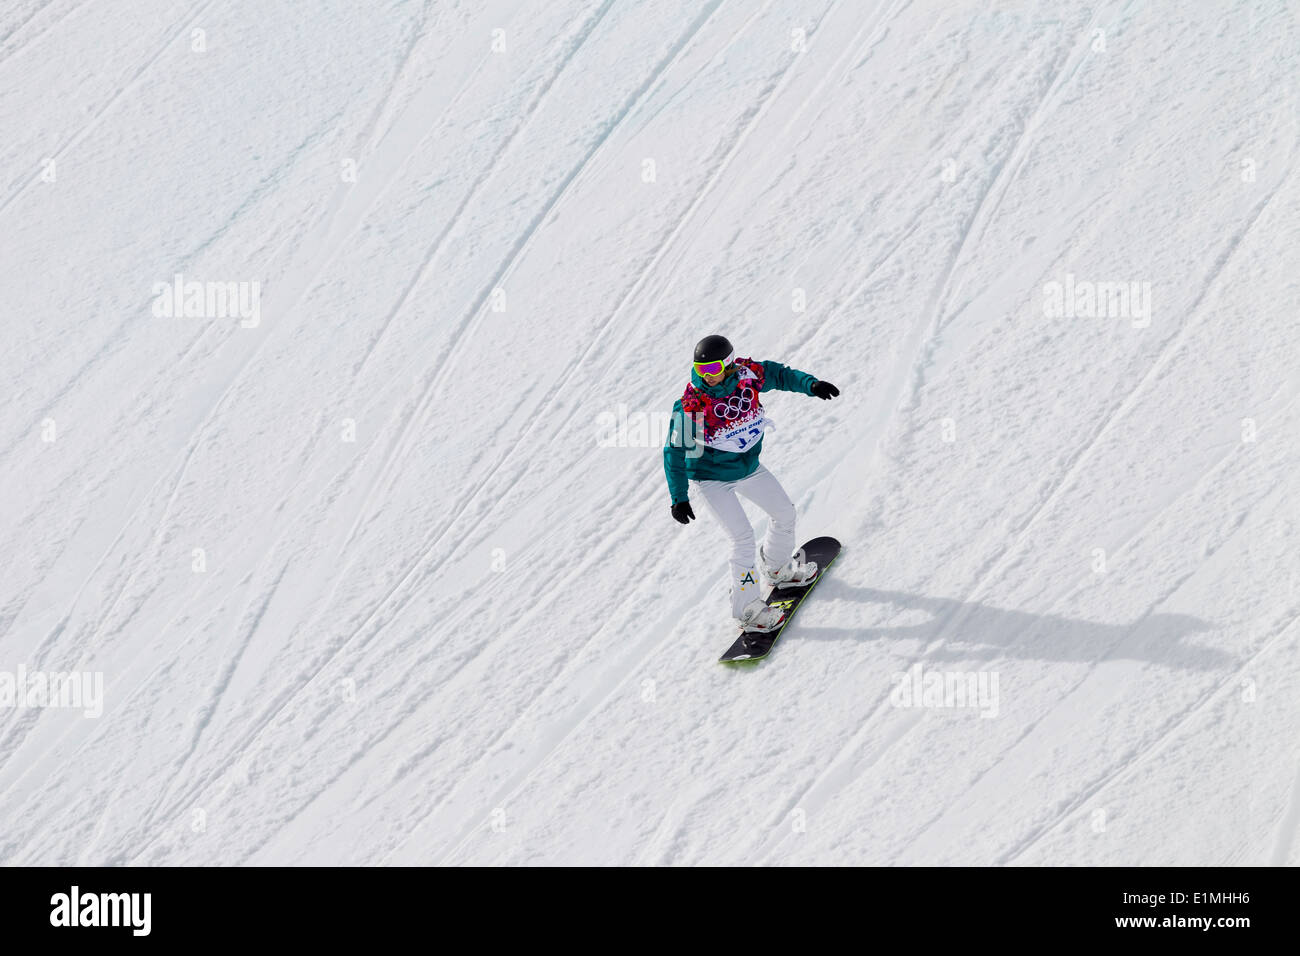 Torah Bright (AUS) competing in Ladies's Snowboard Slopestyle at the Olympic Winter Games, Sochi 2014 Stock Photo